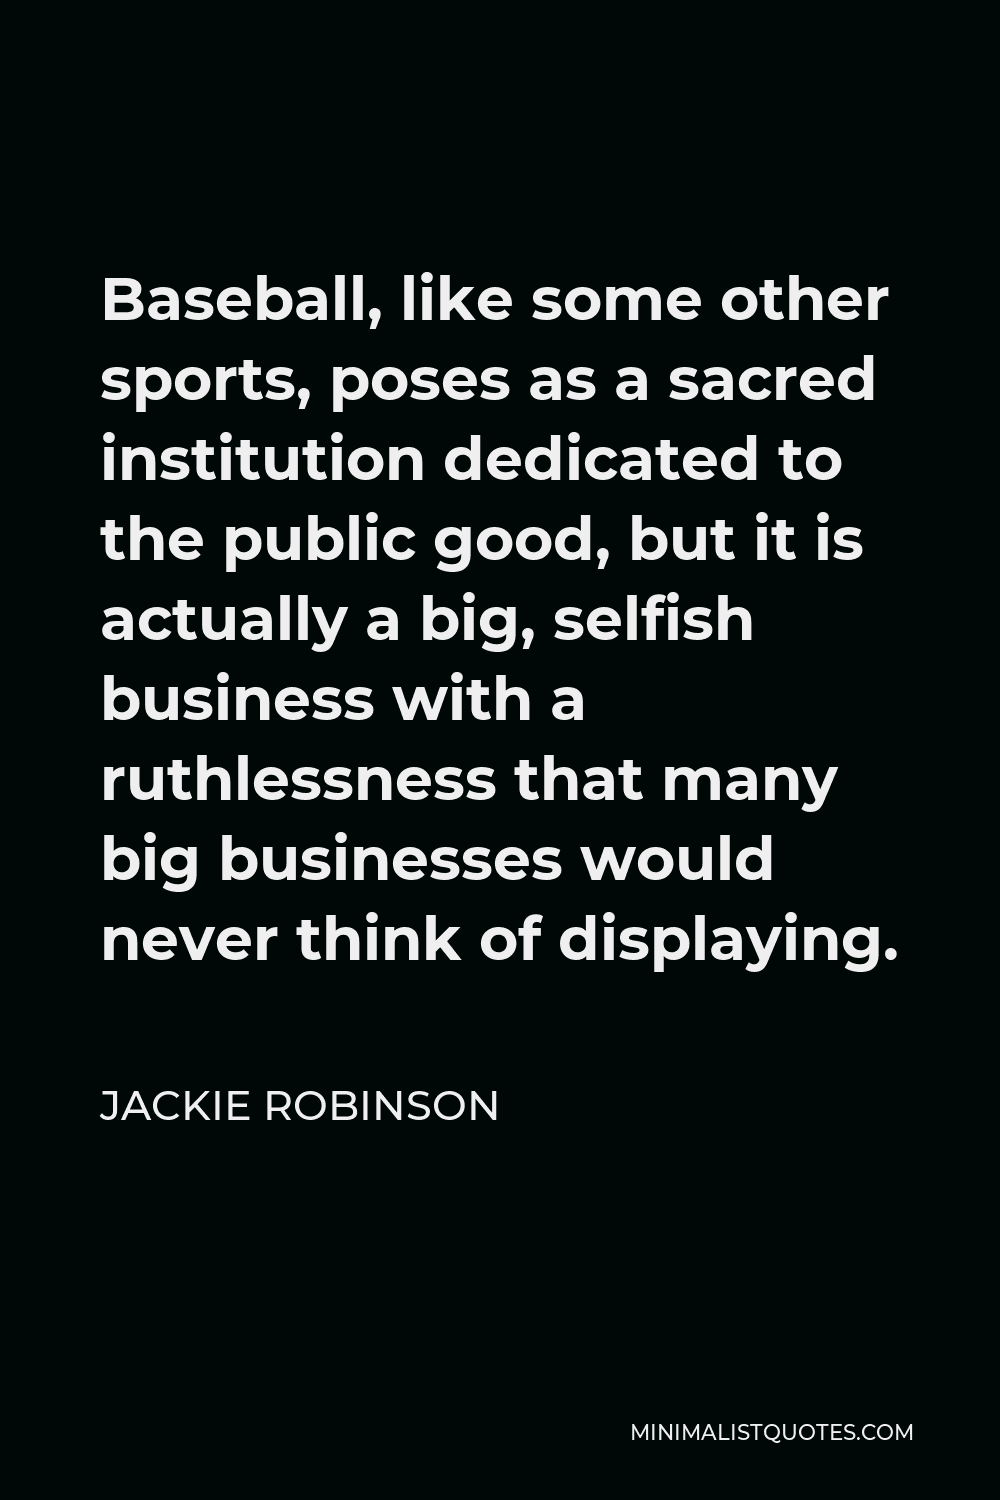 Jackie Robinson Quote - Baseball, like some other sports, poses as a sacred institution dedicated to the public good, but it is actually a big, selfish business with a ruthlessness that many big businesses would never think of displaying.